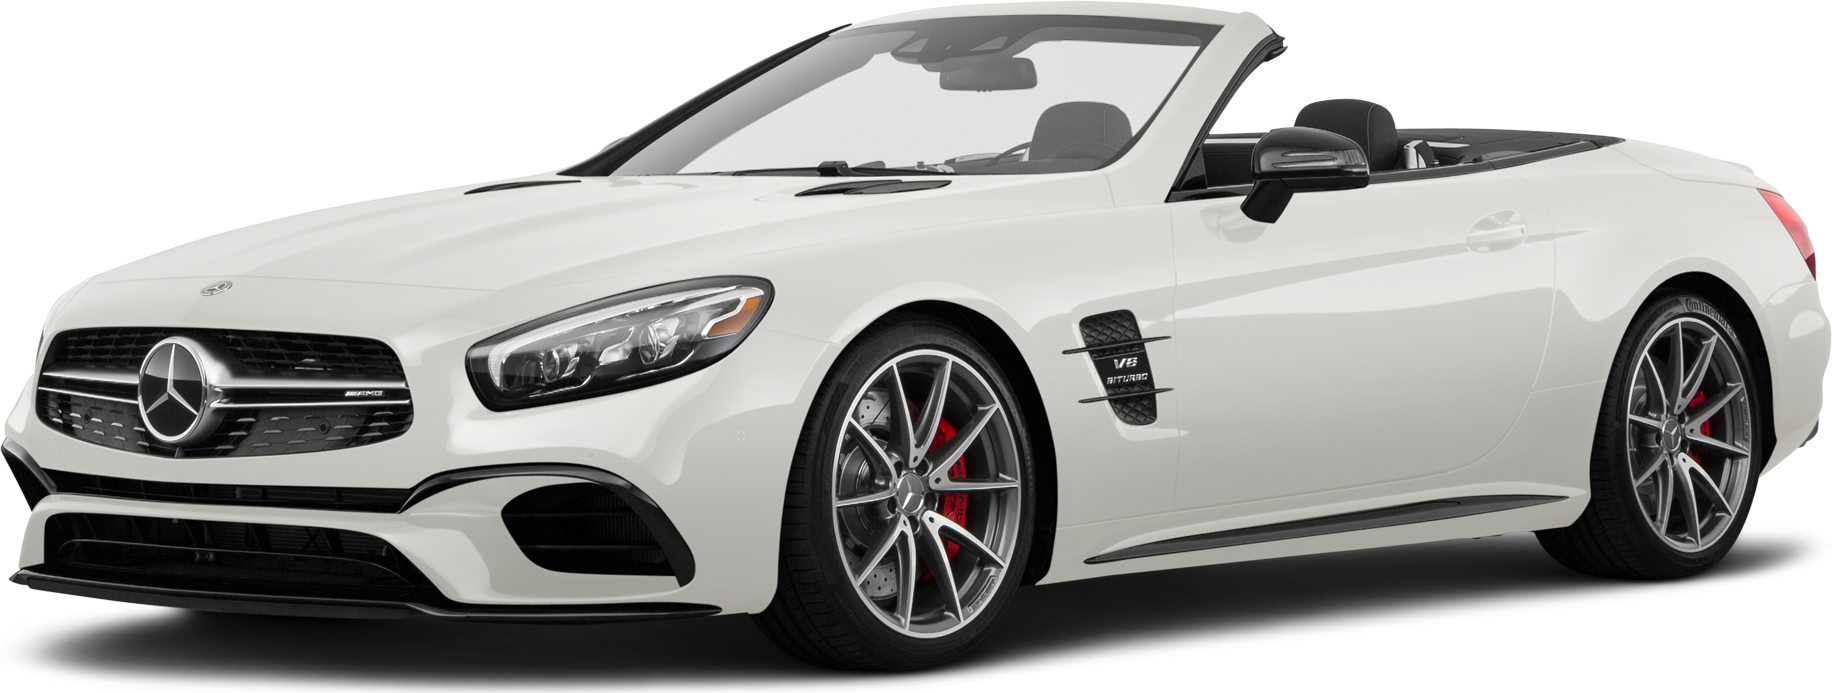 2018 Mercedes-Benz Mercedes-AMG SL Price, Value, Ratings & Reviews